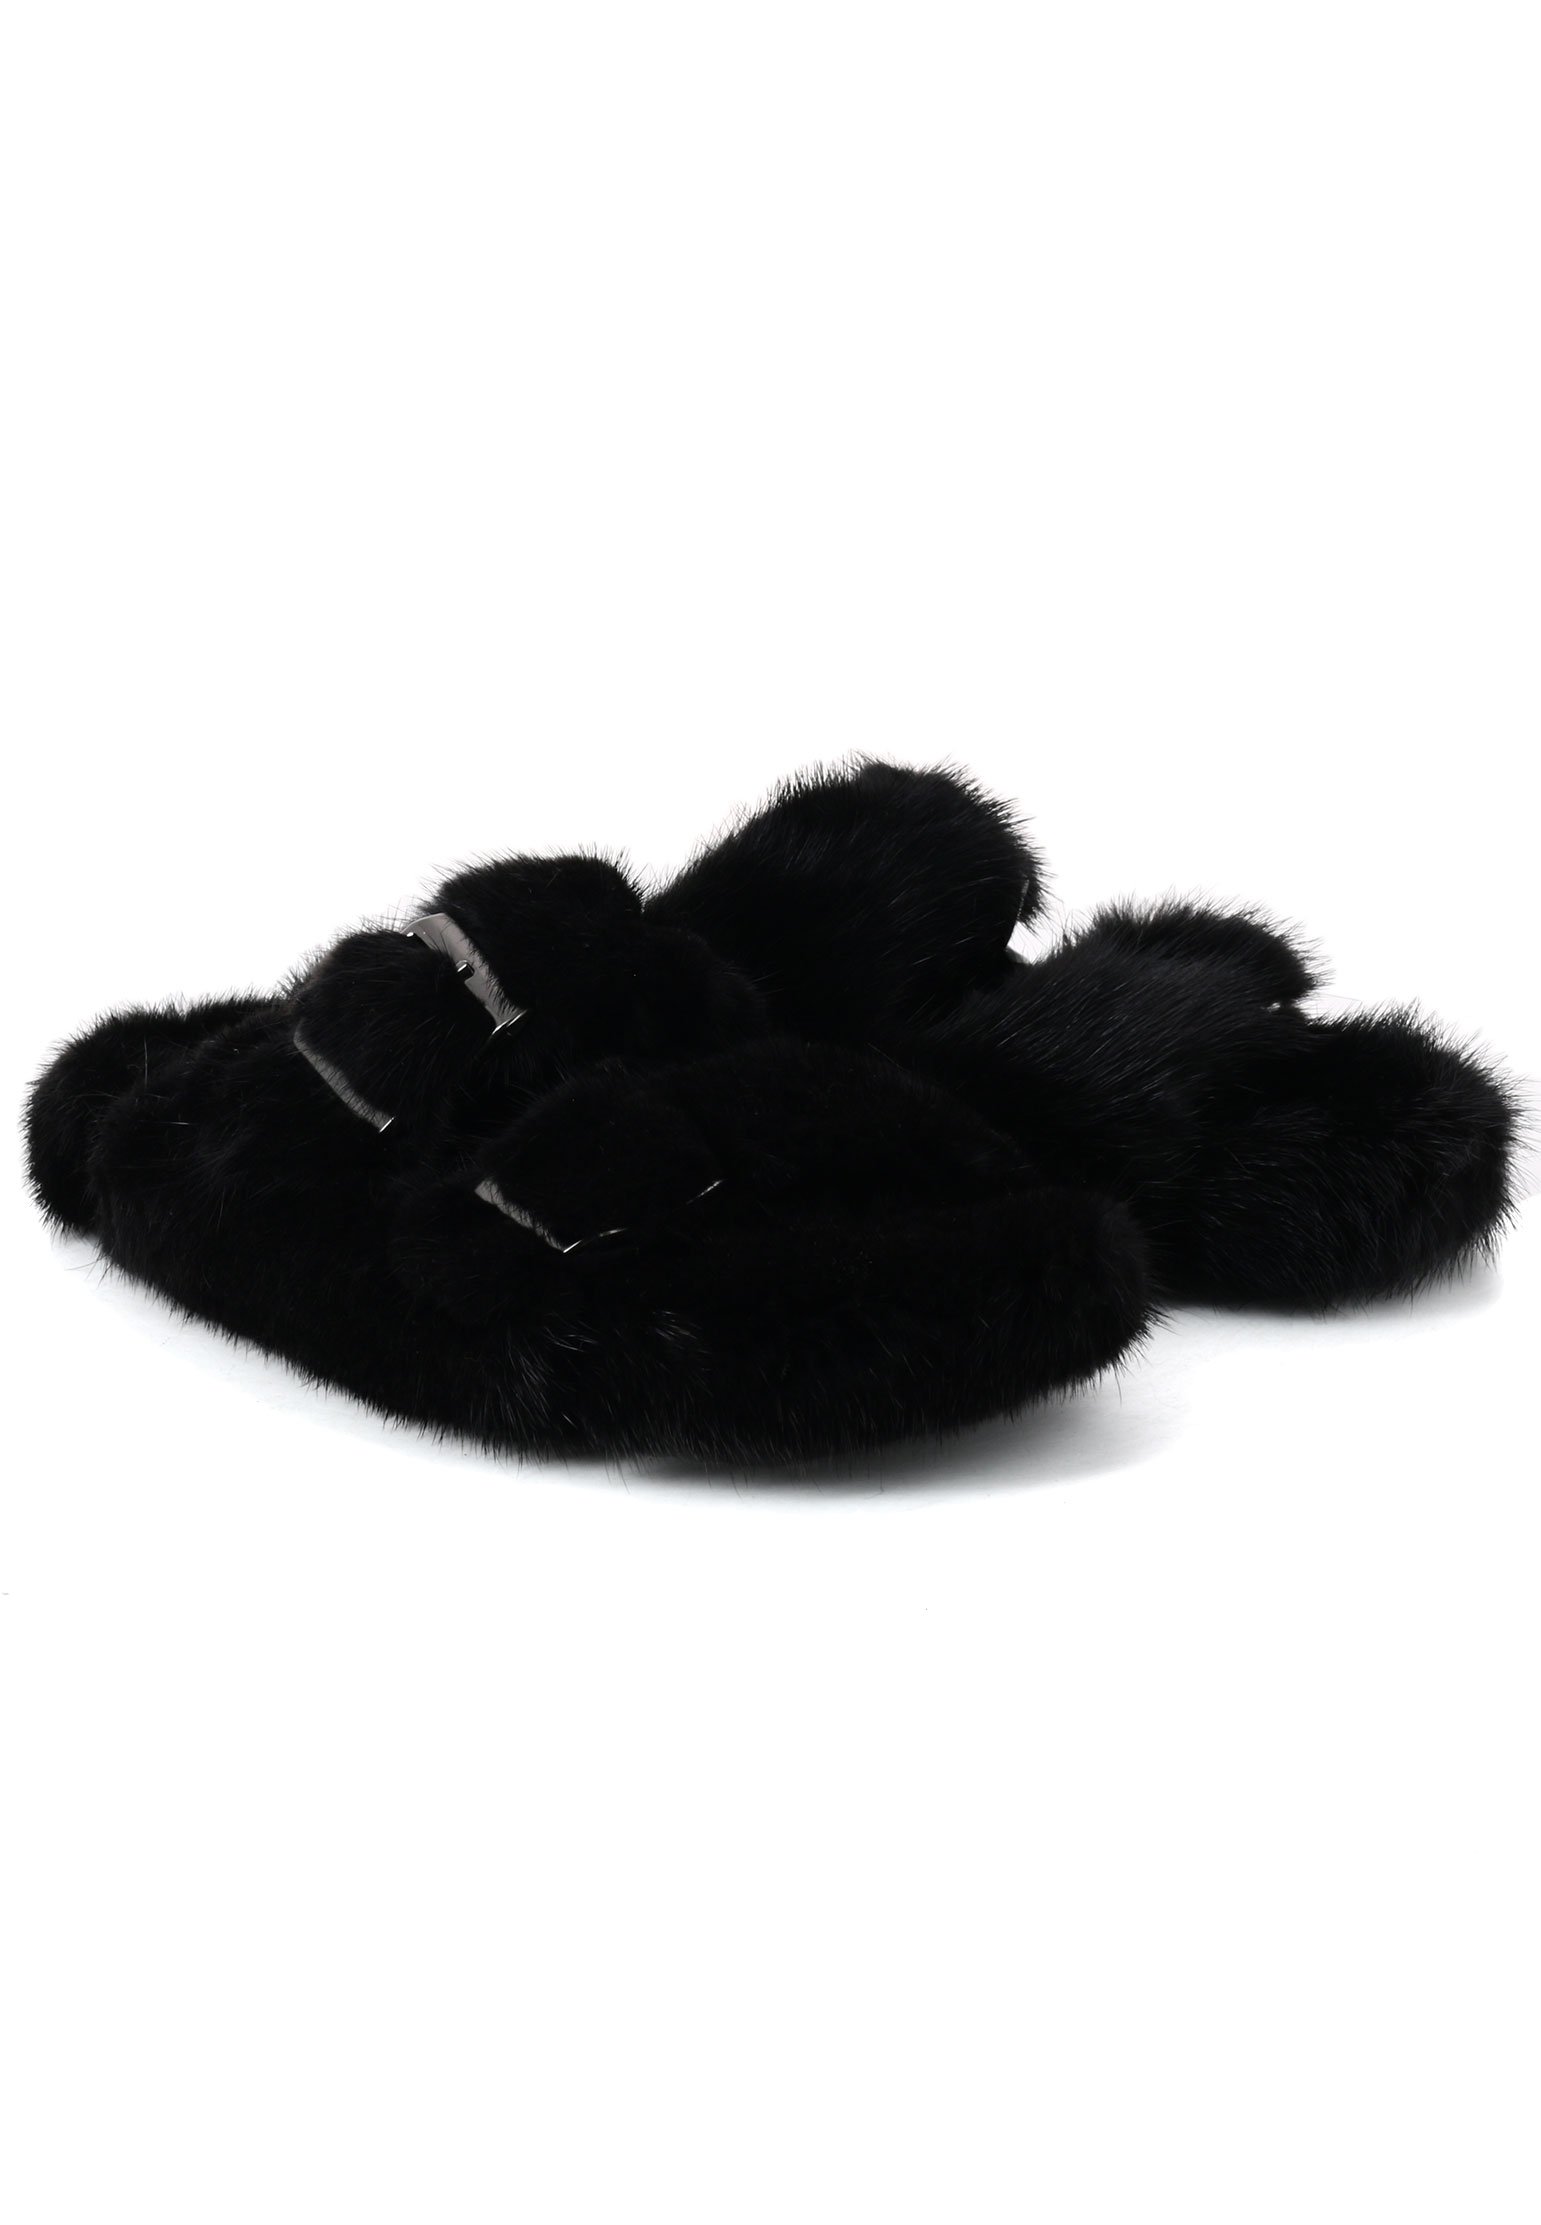 Slippers SAM RONE Color: black (Code: 217) in online store Allure